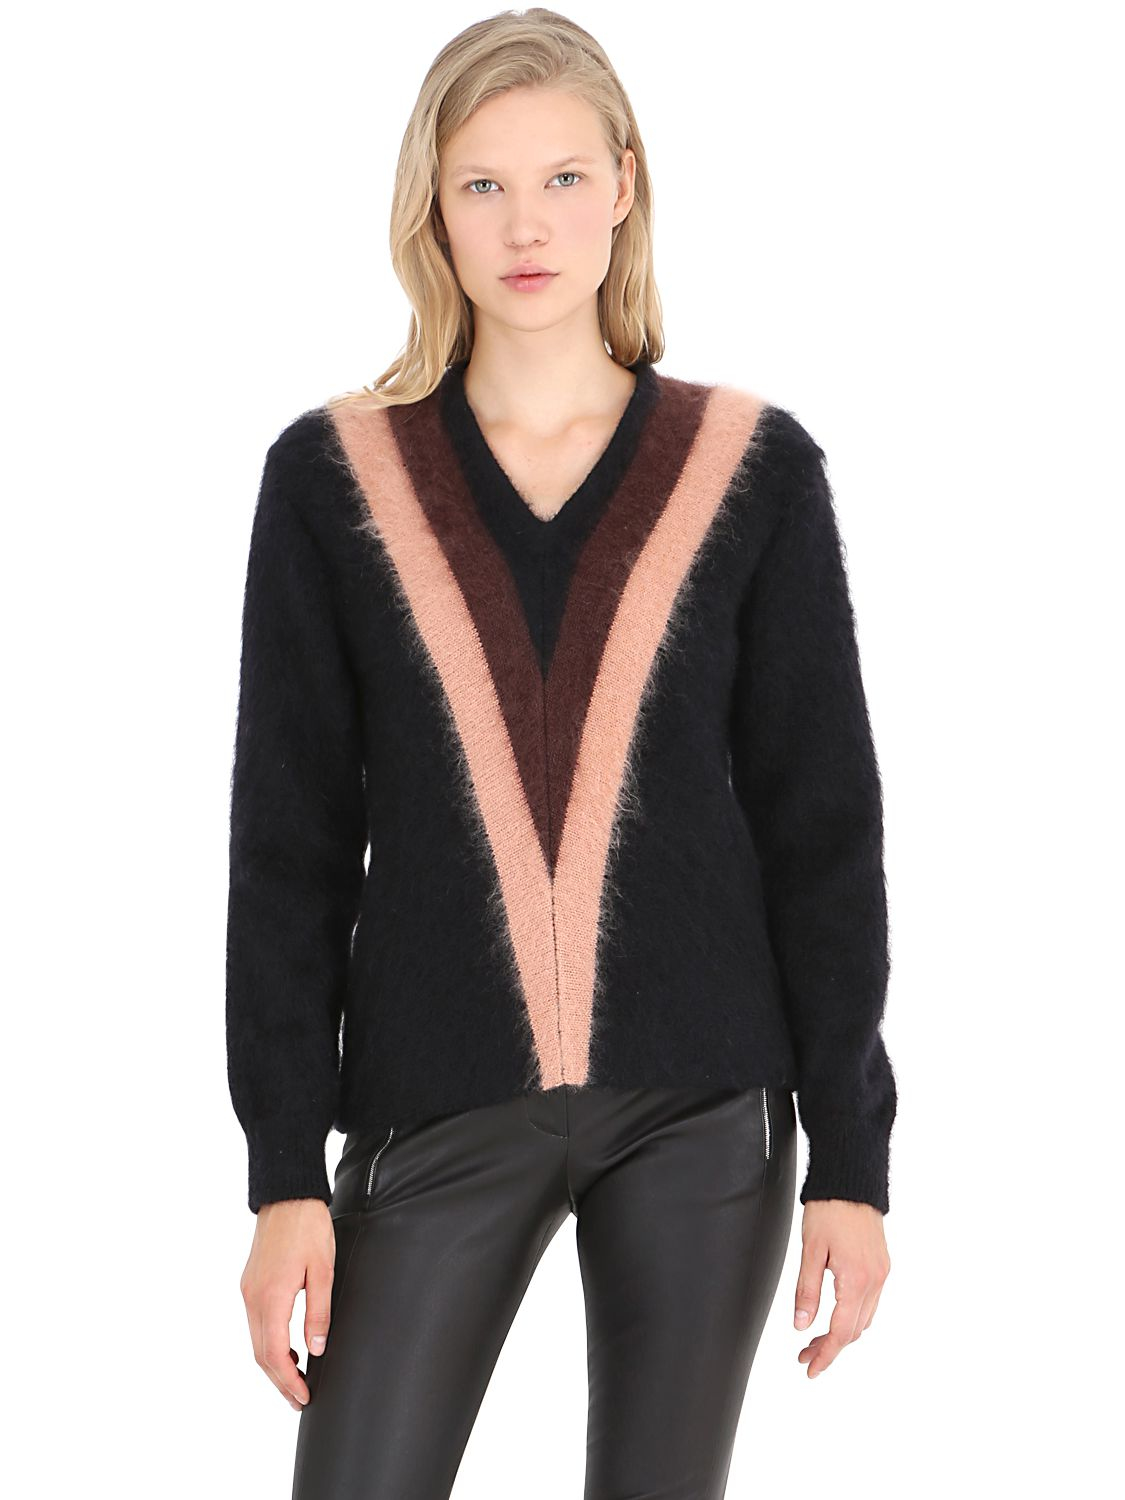 Coach Color Block Mohair Blend V Neck Sweater in Purple - Lyst